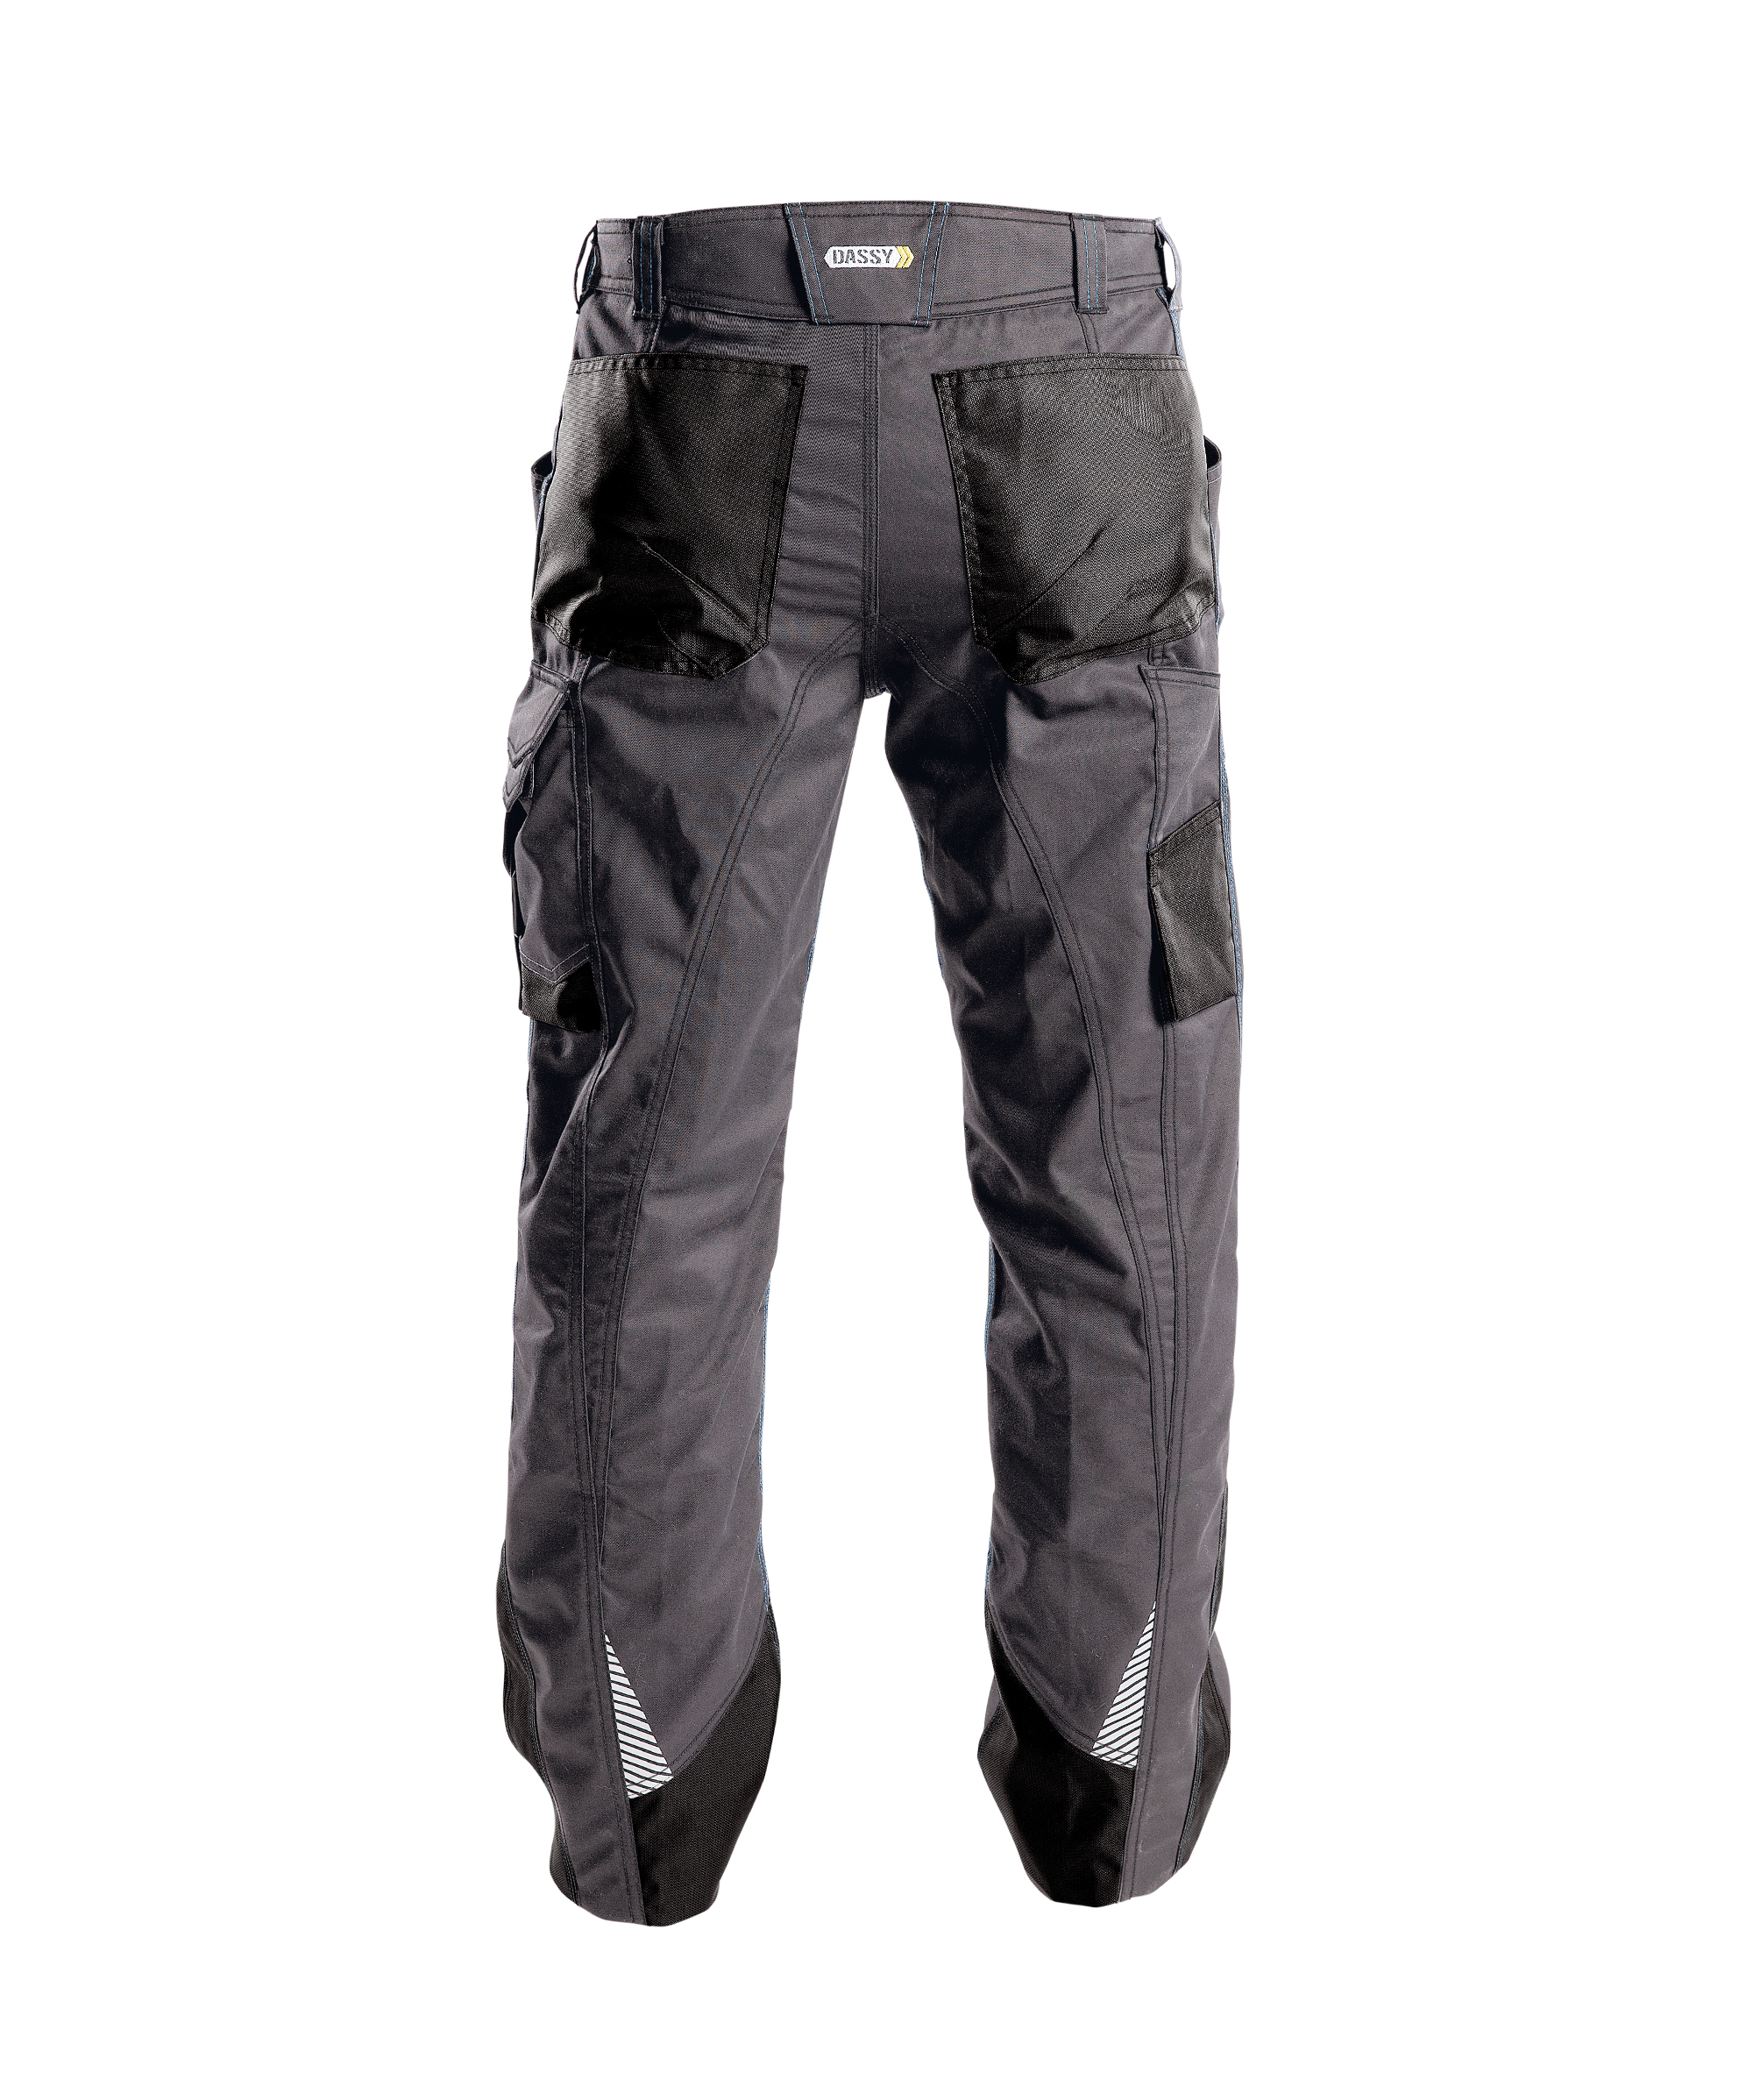 spectrum_two-tone-work-trousers_anthracite-grey-black_back.jpg